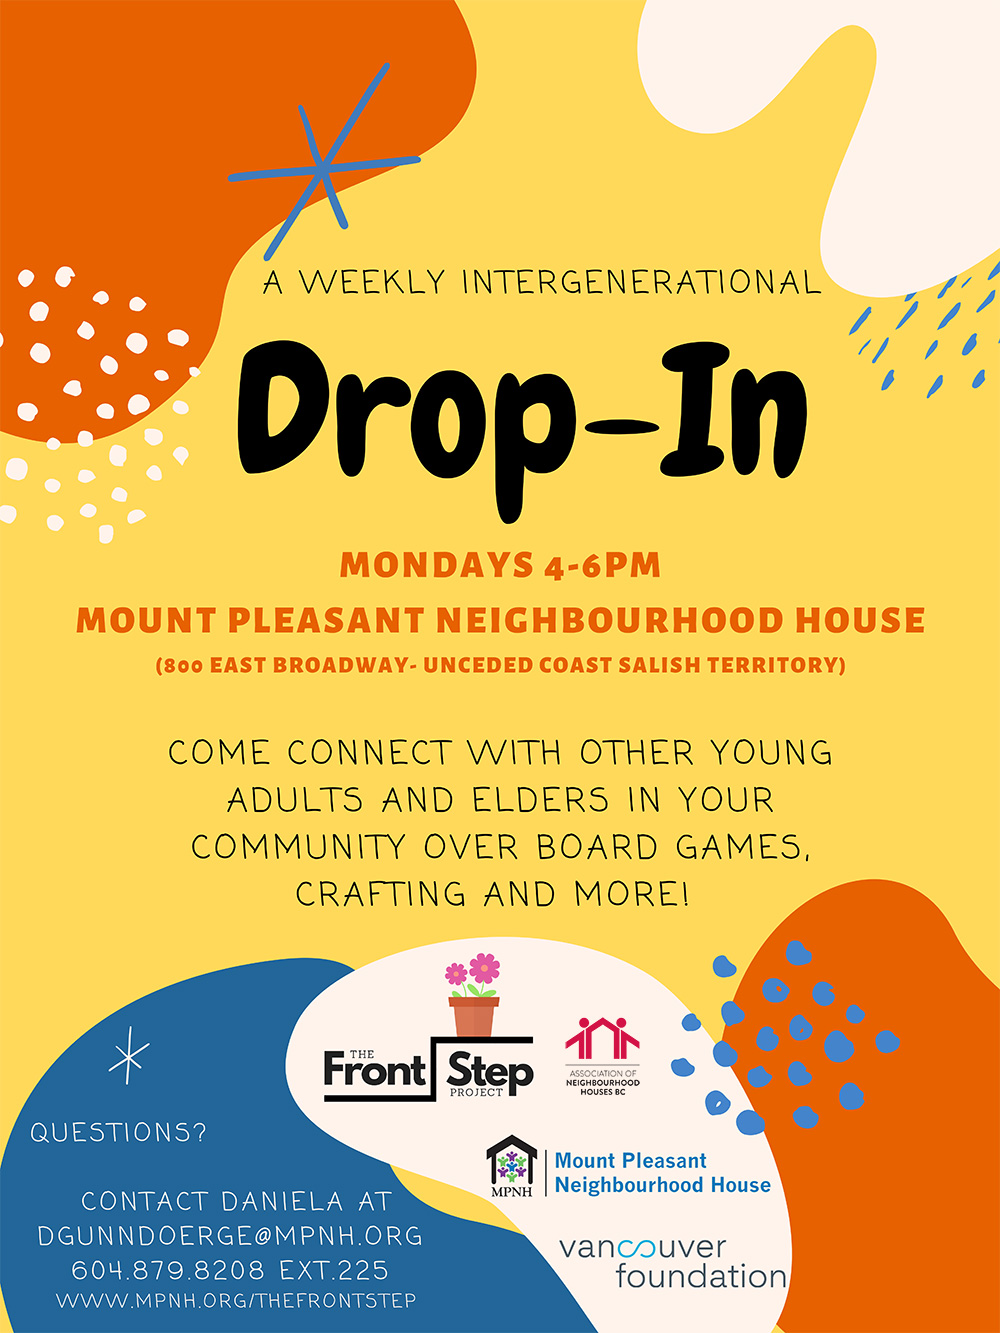 Poster for the Intergenerational Drop-In full of bright yellow, orange, and blue